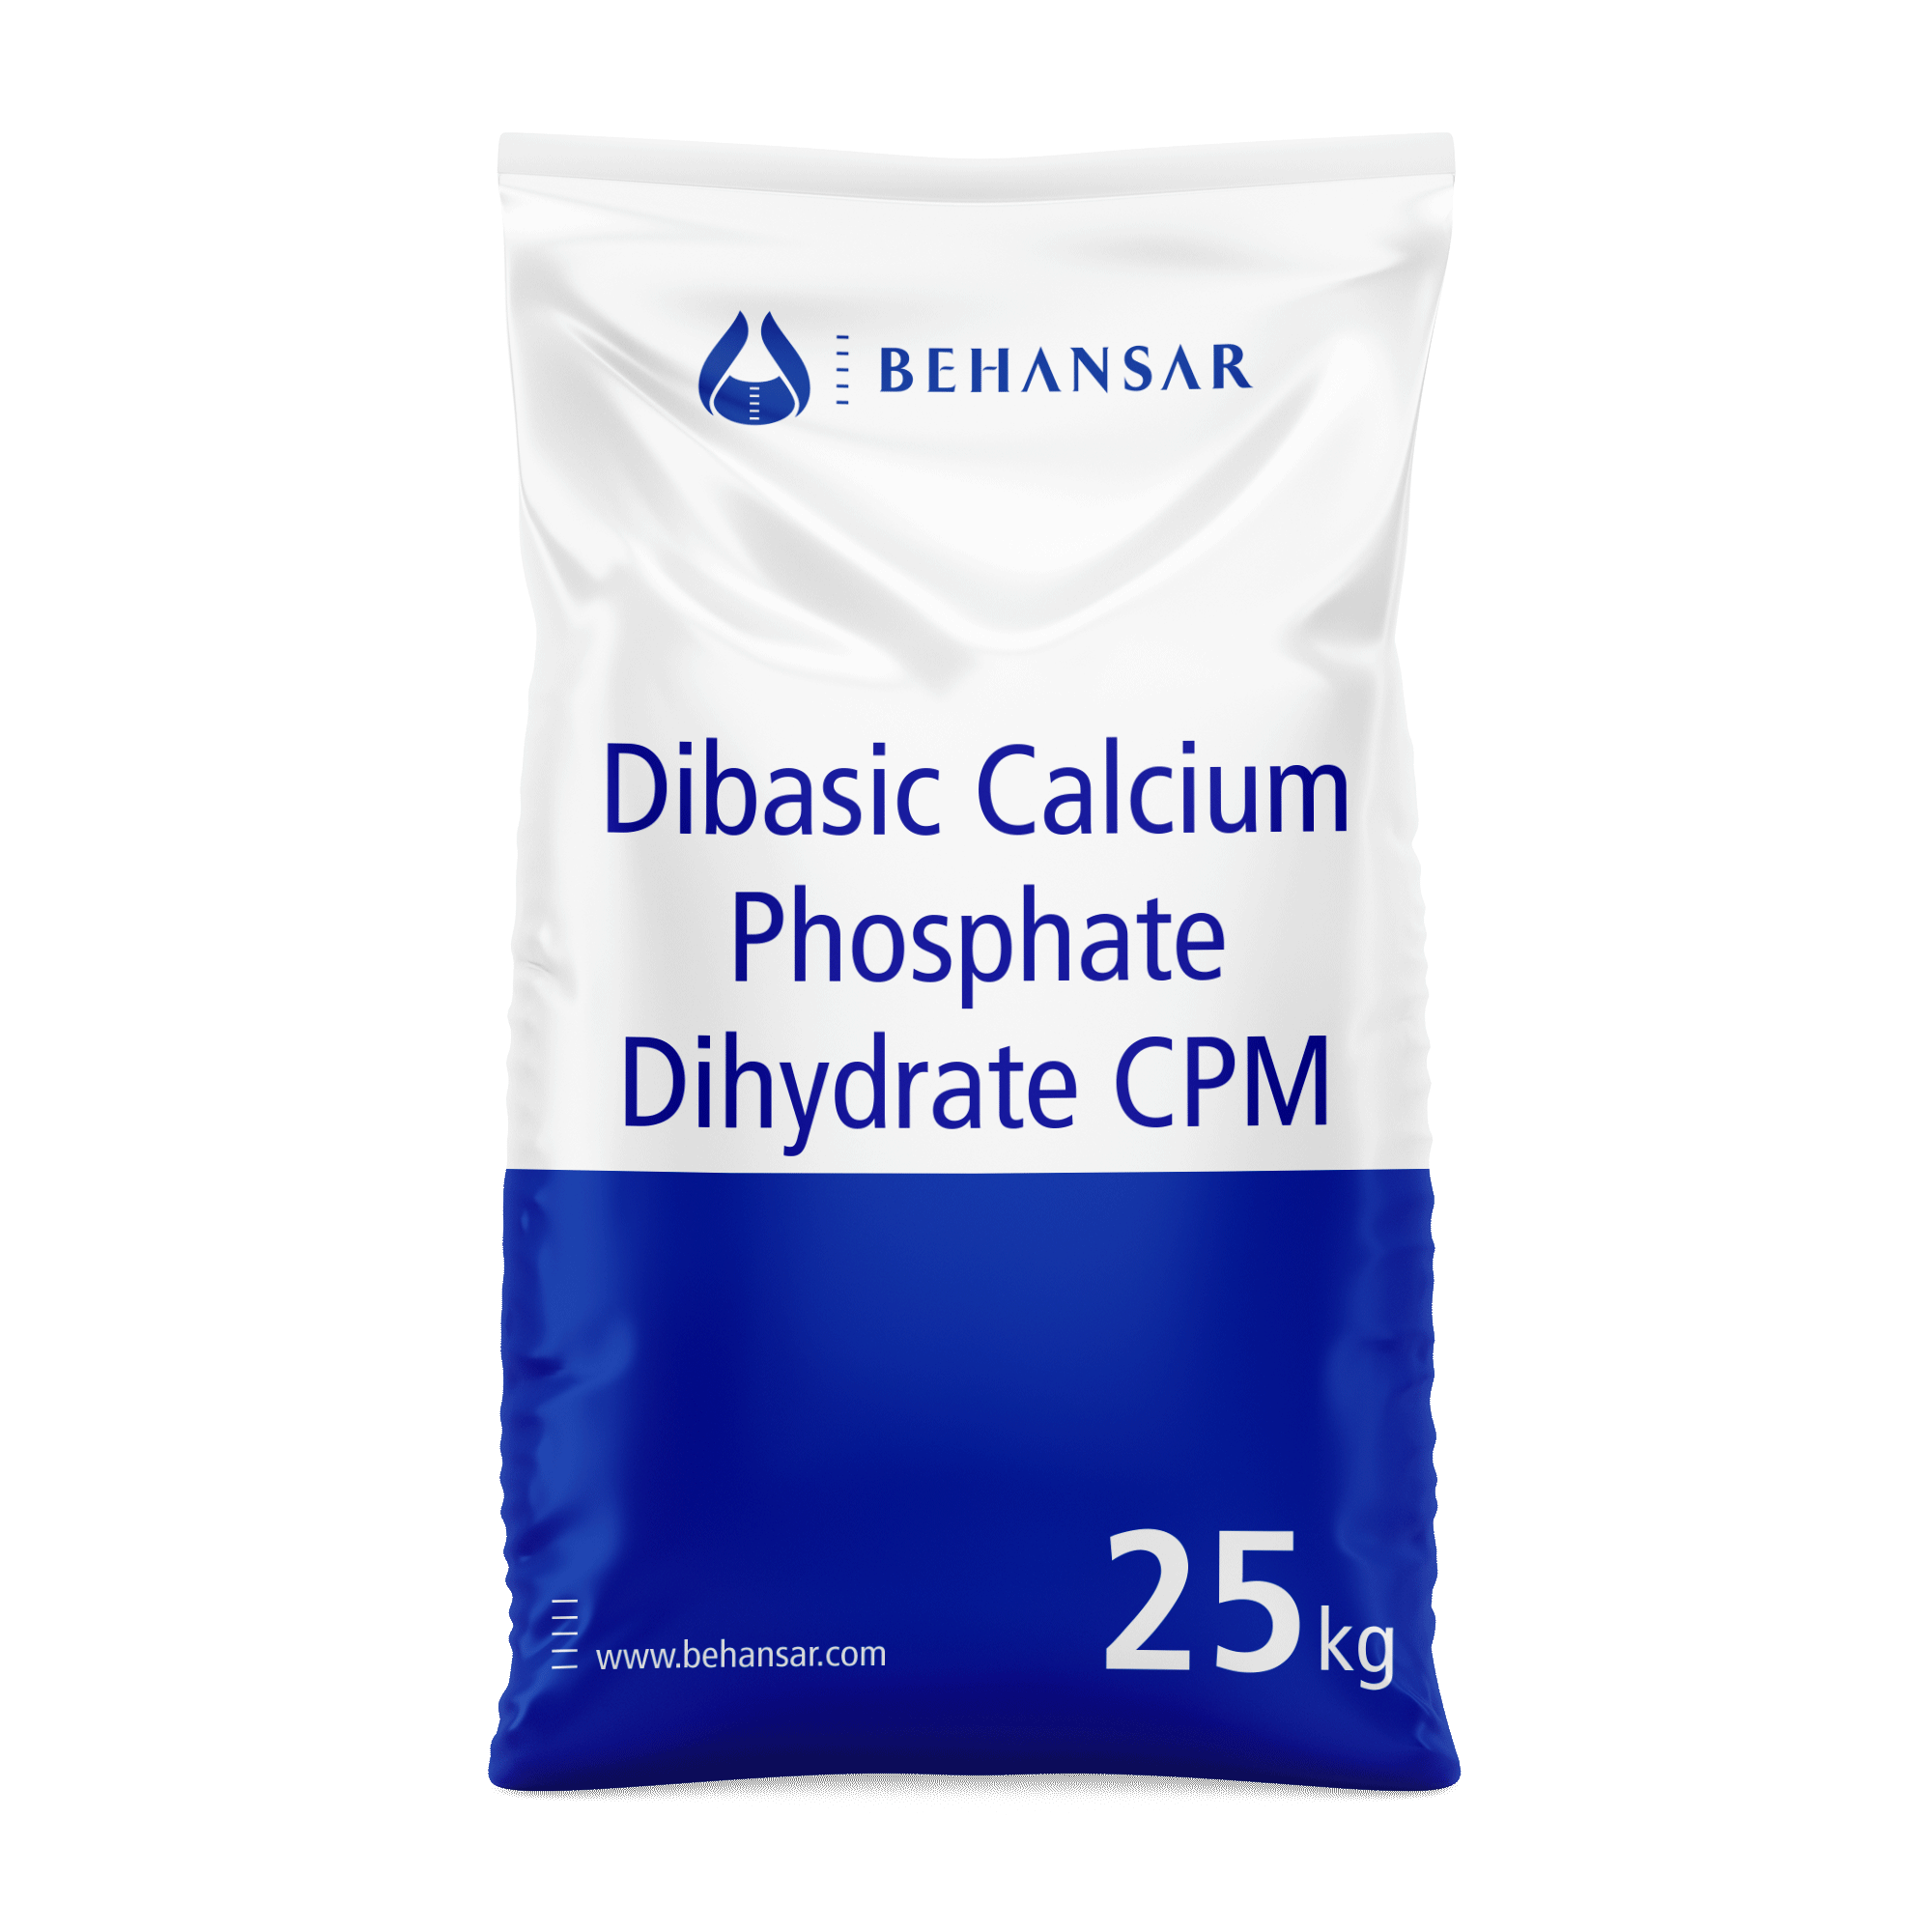 Dibasic Calcium Phosphate Dihydrate CPM is one of the products of Behansar Co